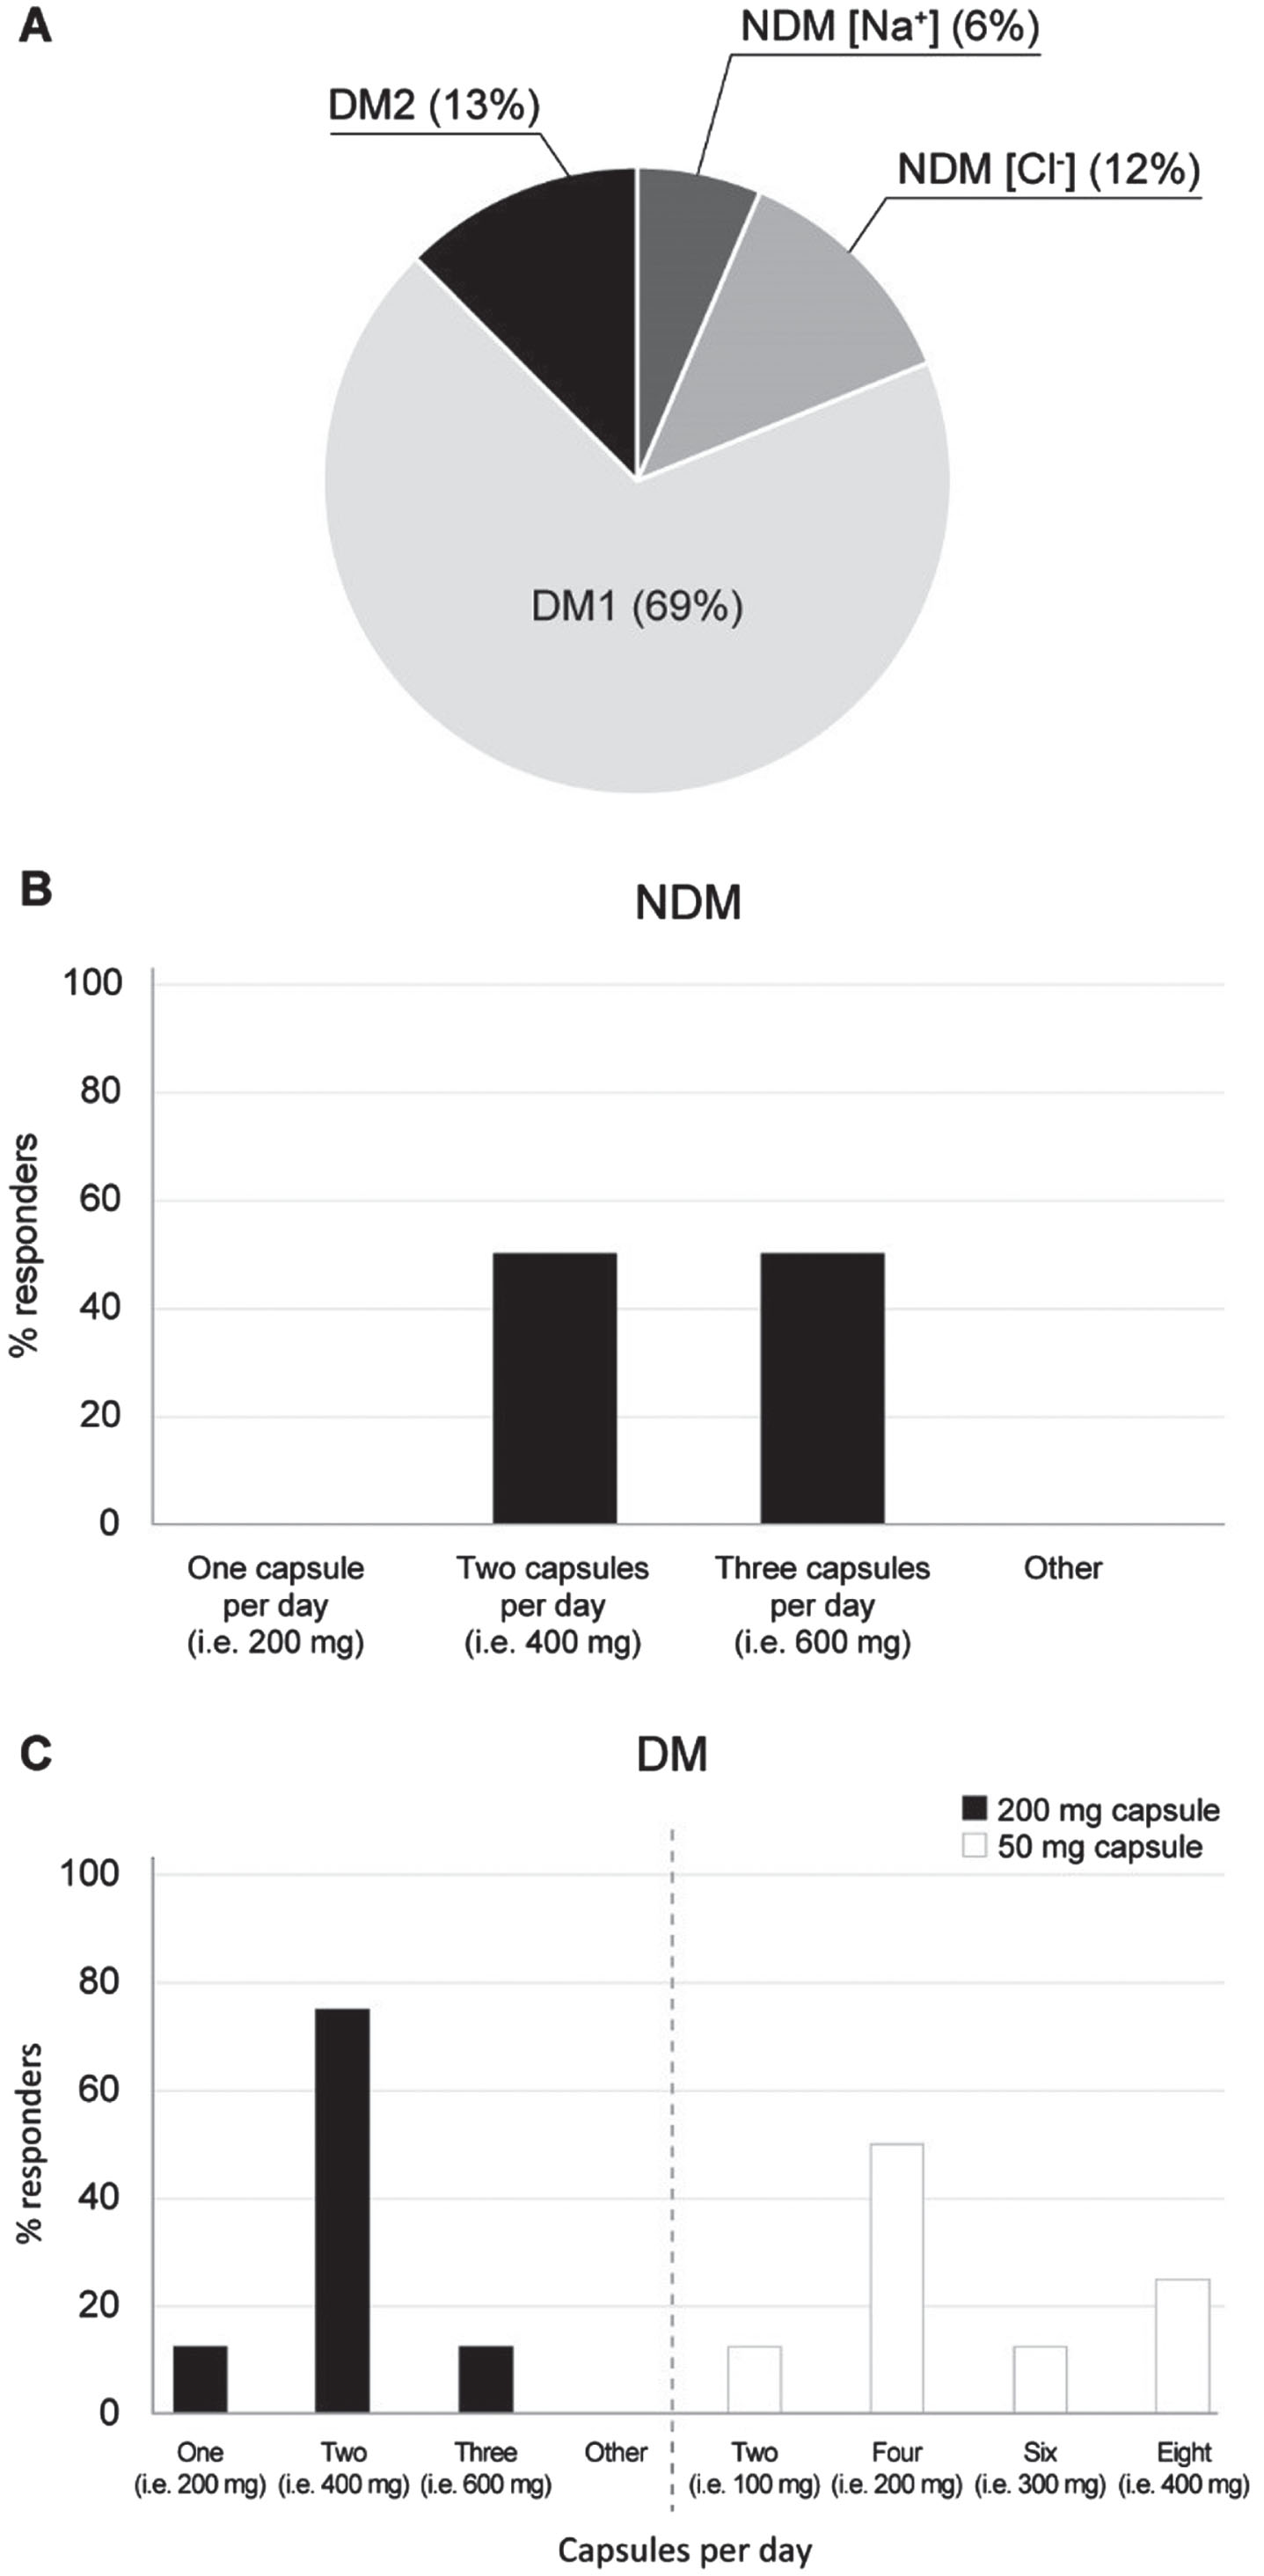 (A) Percentage distribution of the patients assisted by the participants to the Delphi panel, according to the different myotonic disorder. NDM [Na+]: non-dystrophic myotonia due to sodium channel mutation; NDM [Cl-]: non-dystrophic myotonia due to chloride channel mutation; DM1: myotonic dystrophy type 1; DM2: myotonic dystrophy type 2. (B) Expected dosage of mexiletine hydrochloride [HCl] (200 mg capsule) received on average by a NDM adult patient in the long-term in the opinion of the expert panelists. (C) Expected dosage of mexiletine hydrochloride [HCl] (200 mg and 50 mg capsules) received on average by a DM adult patient in the long-term in the opinion of the expert panelists. Note: 200 mg of mexiletine hydrochloride [HCl] are equivalent to 167 mg of mexiletine [NaMuscla®].